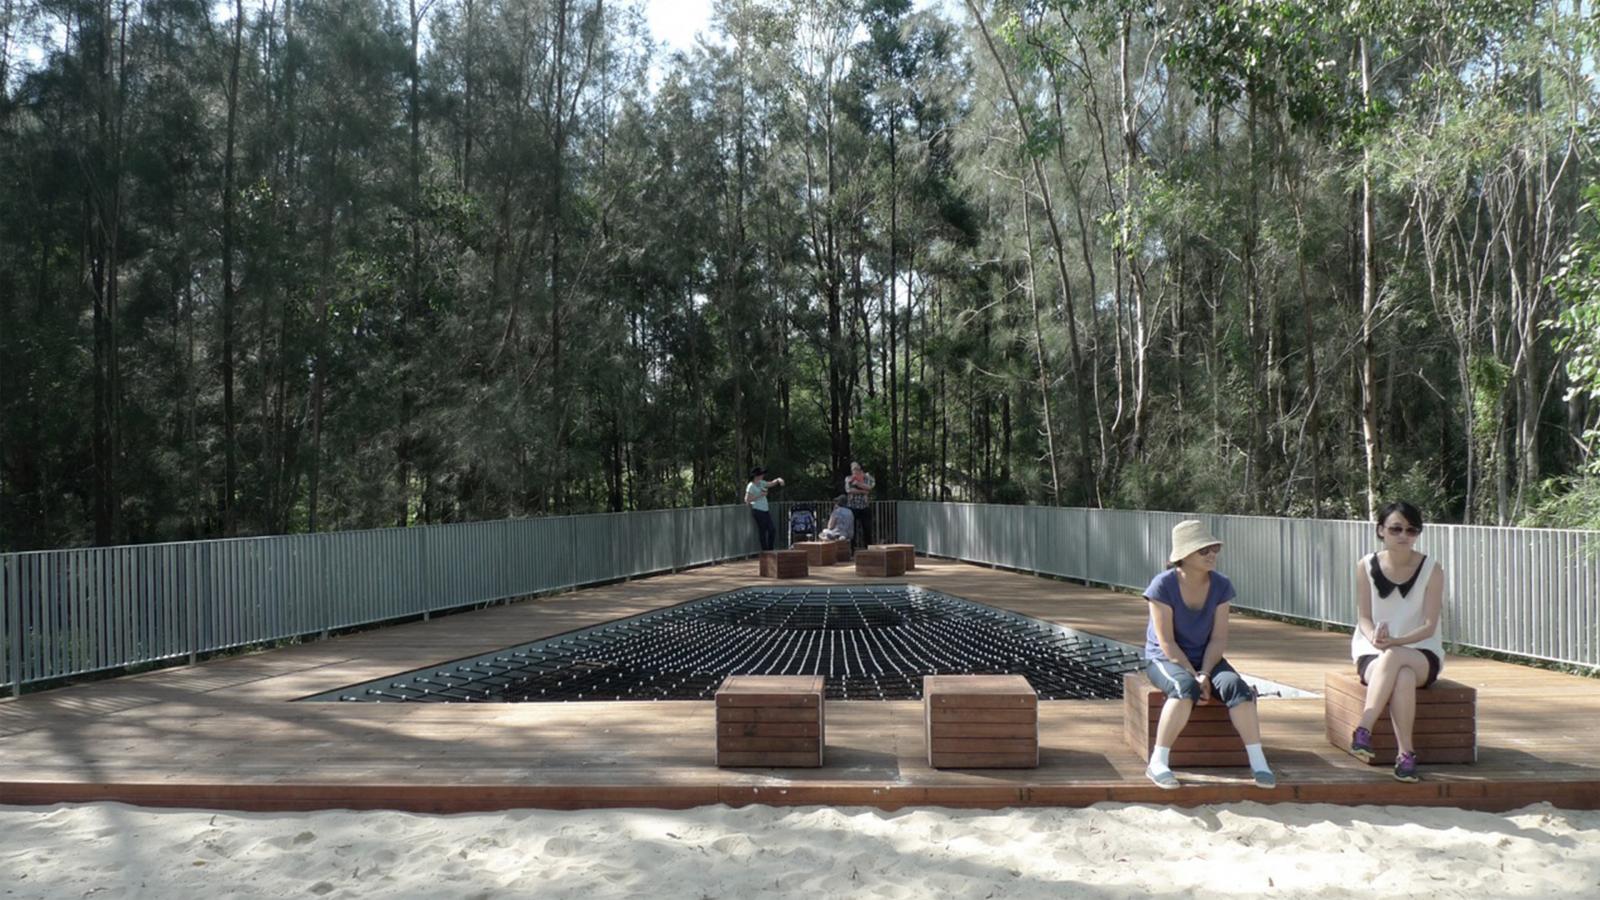 Two people sit on wooden benches on a walkway with a grid of small black cylinders. The platform, reminiscent of a relaxed paddock precinct, is surrounded by trees and more people can be seen standing at the far end. There is sand in the foreground and metal railings along the edges of the walkway.